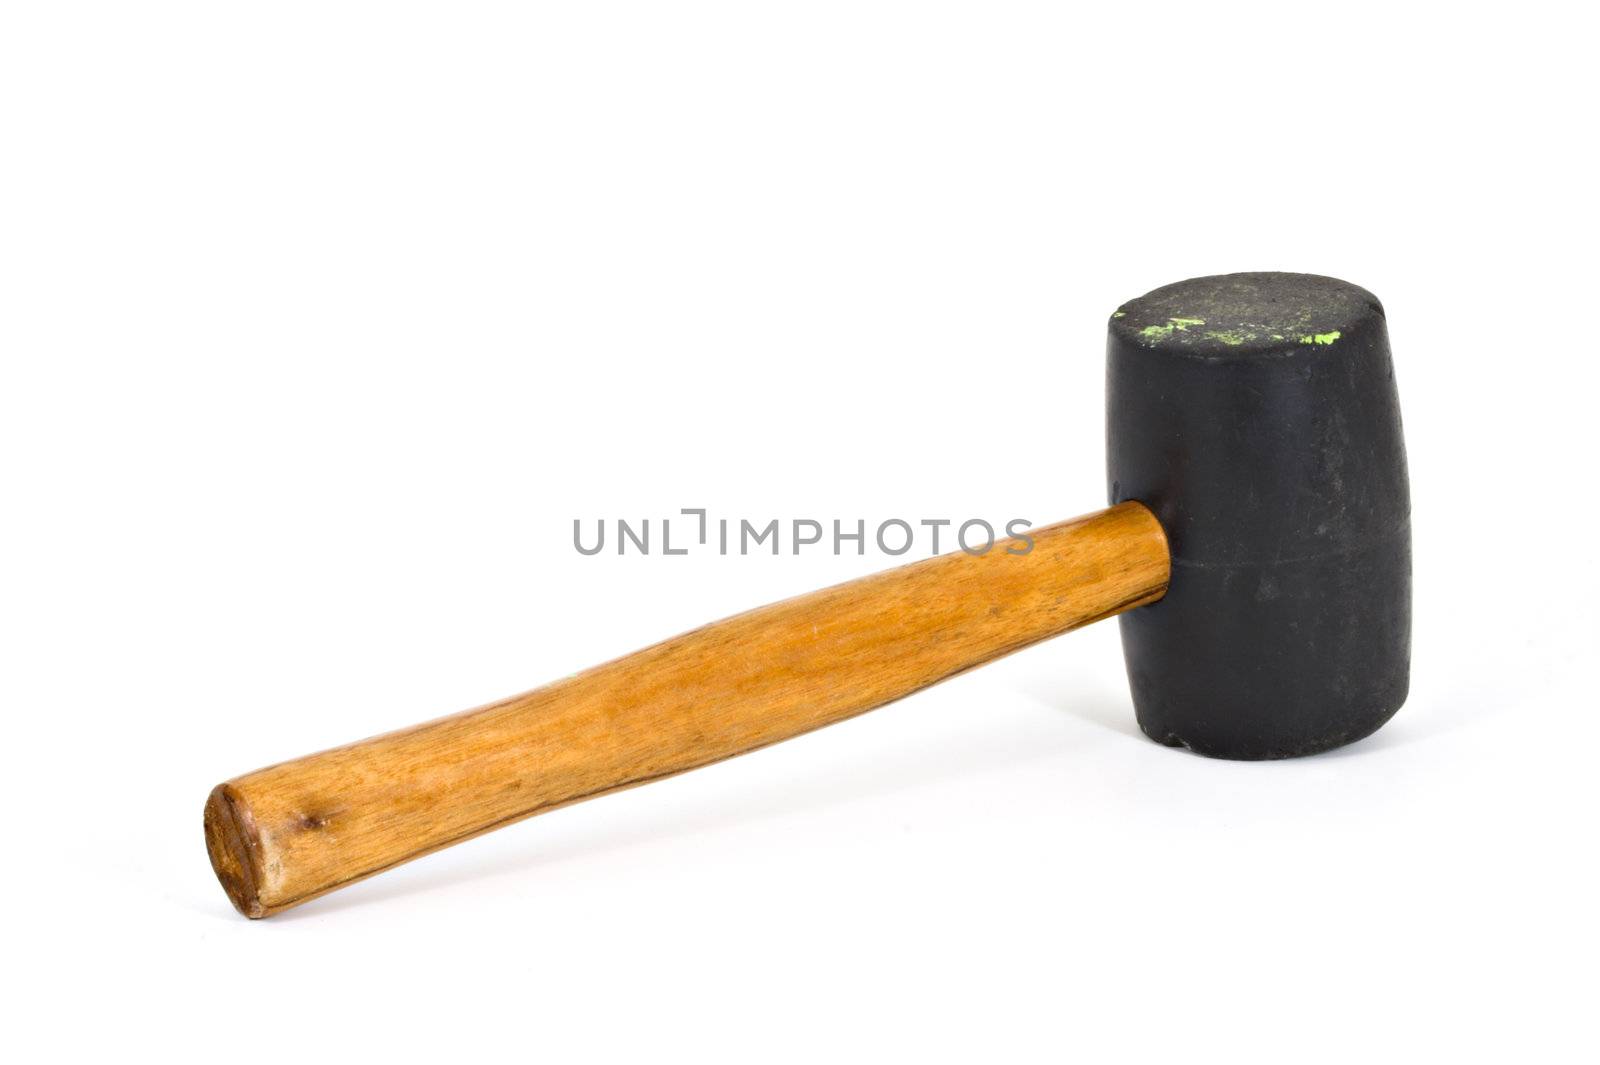 Rubber mallet isolated on a white background